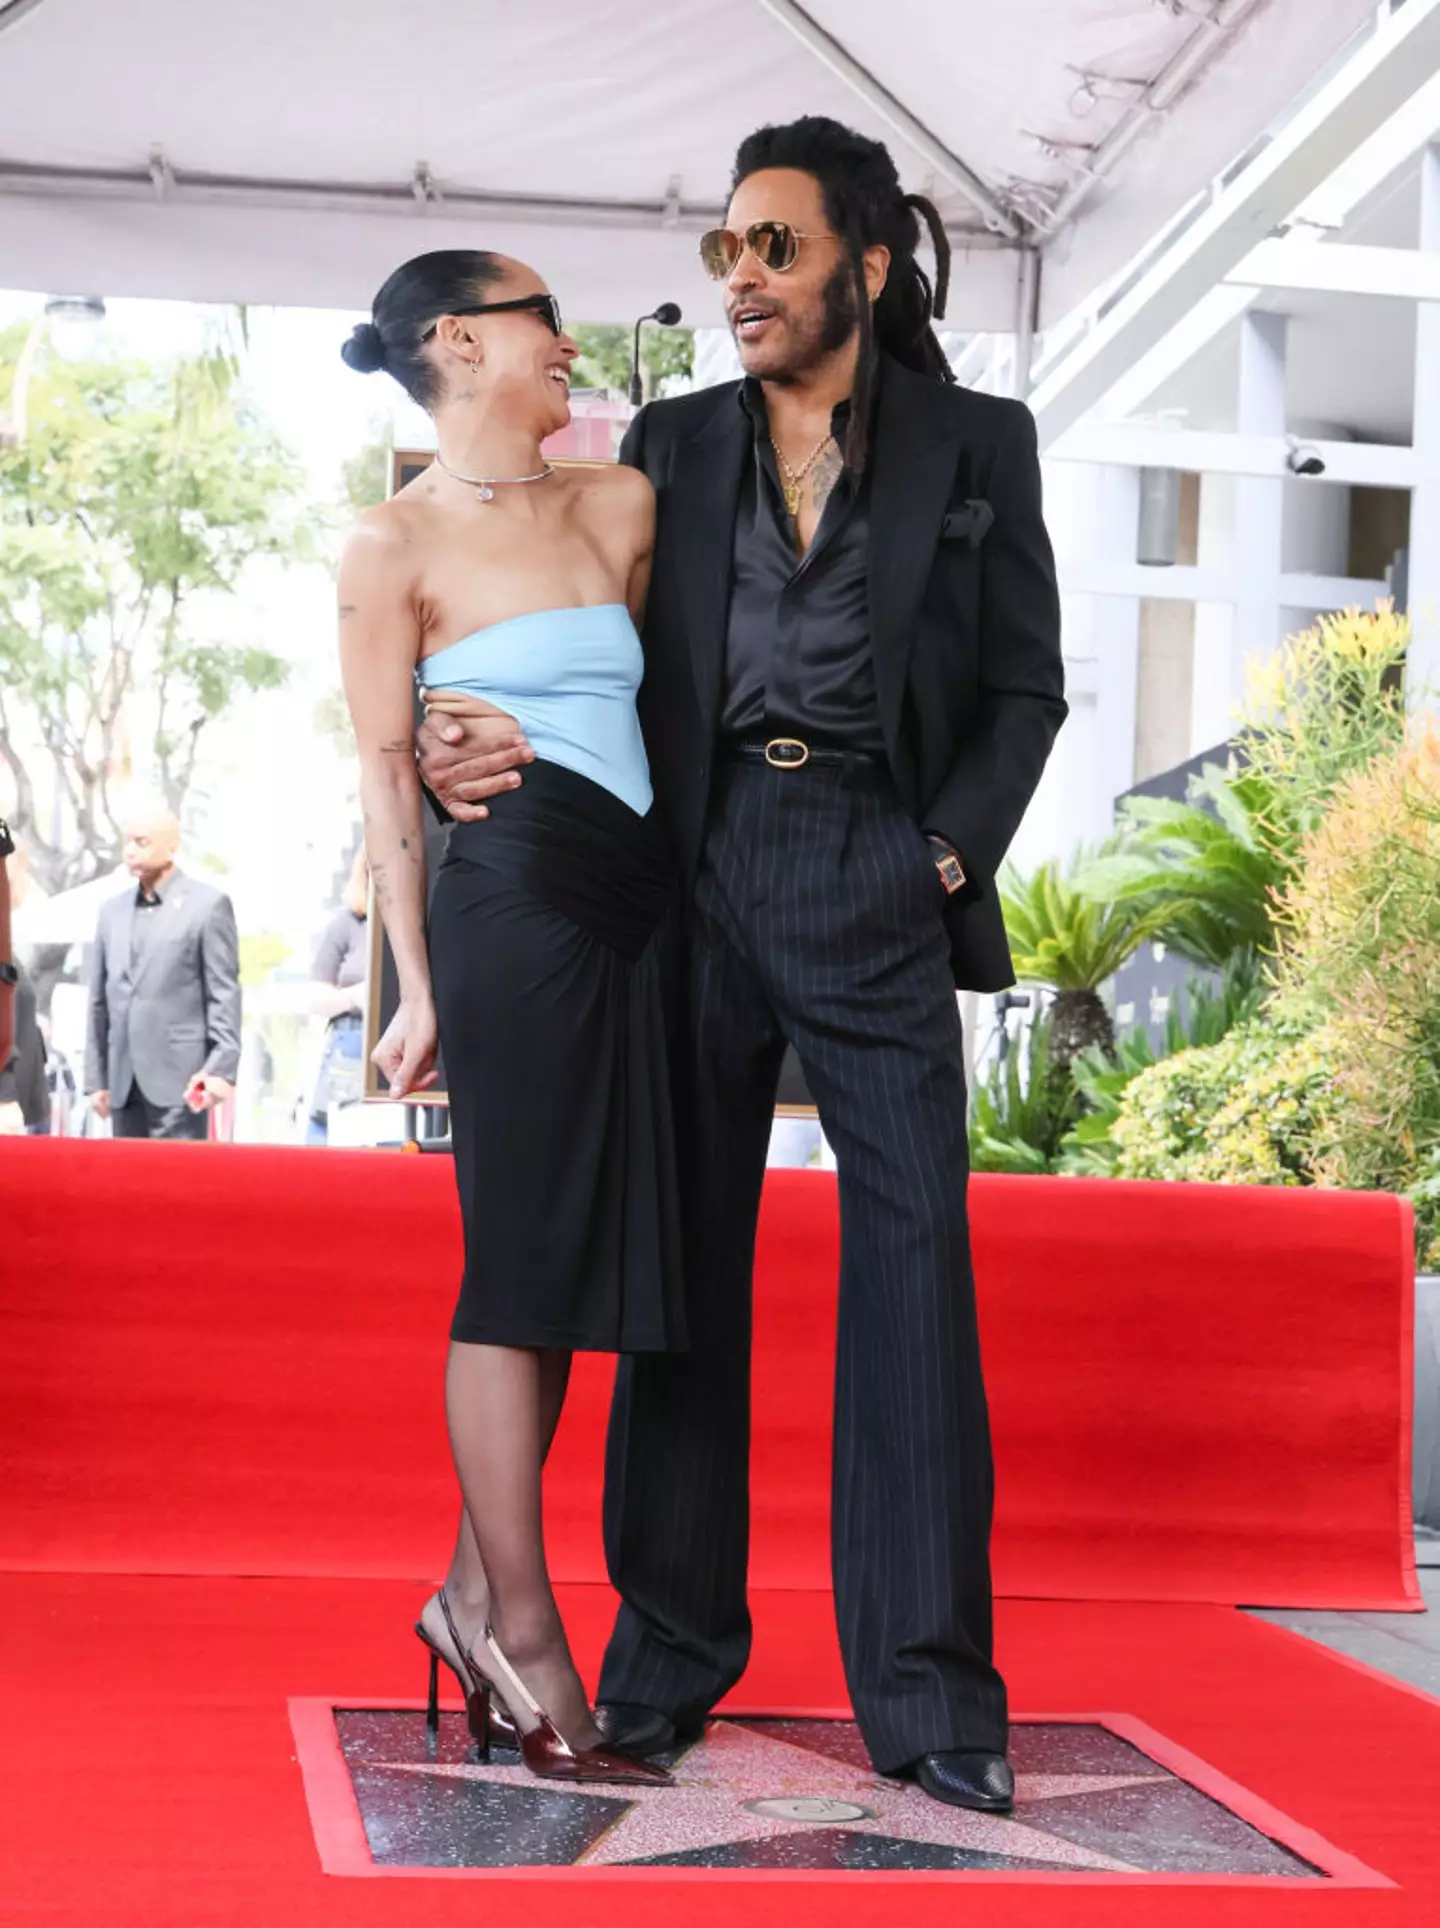 Kravitz had his daughter, Zoe, as one of the guest speakers at his ceremony: